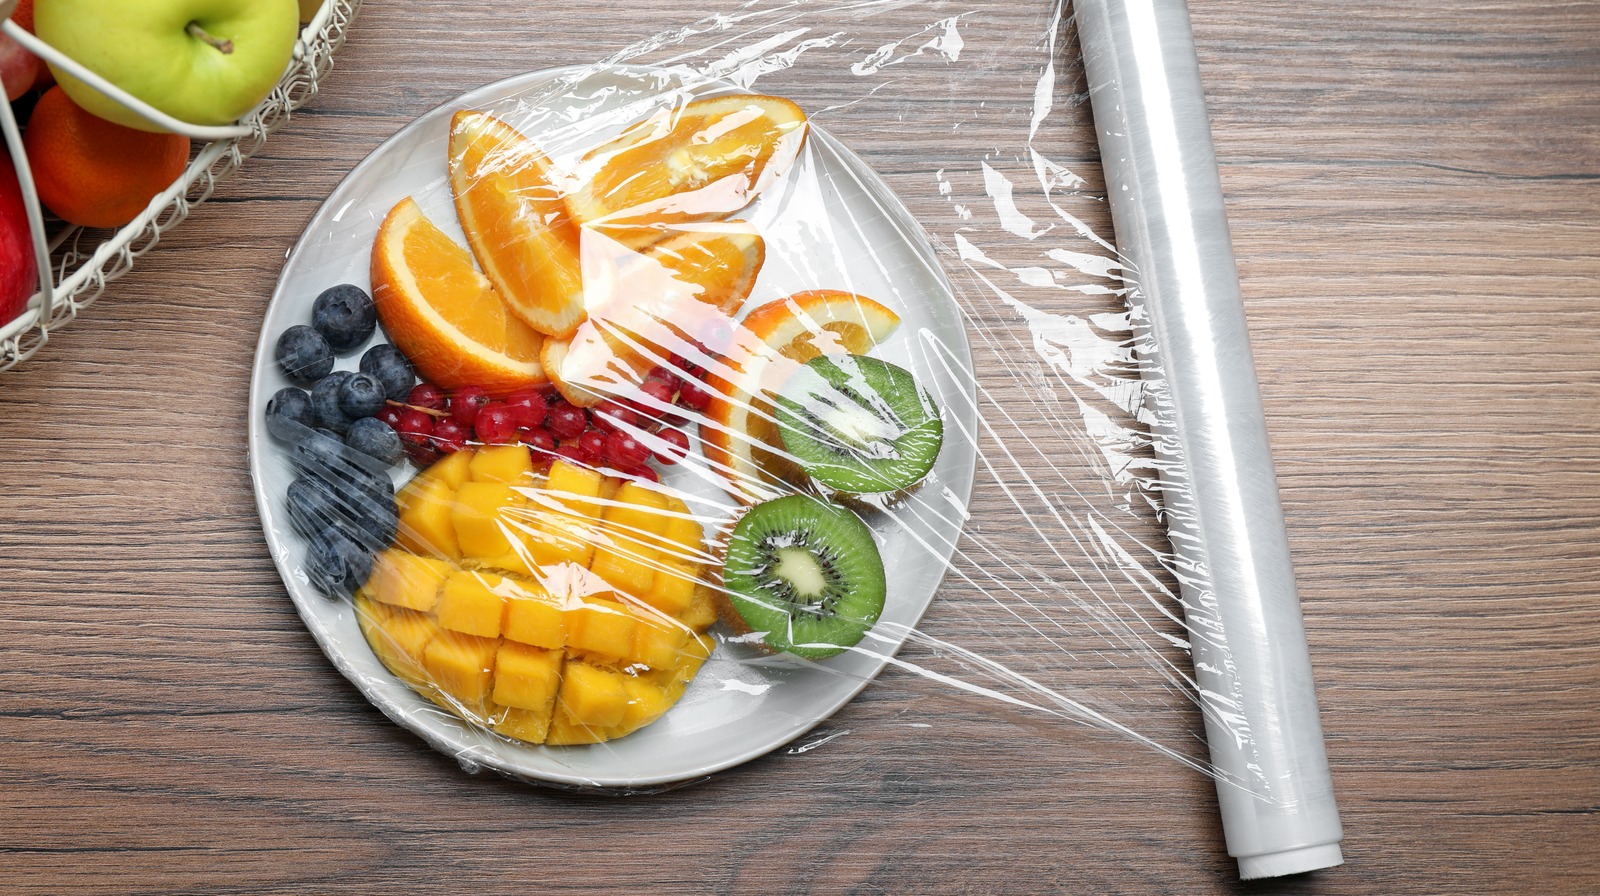 12 Surprising Uses For Plastic Wrap: Not Just For Food Only